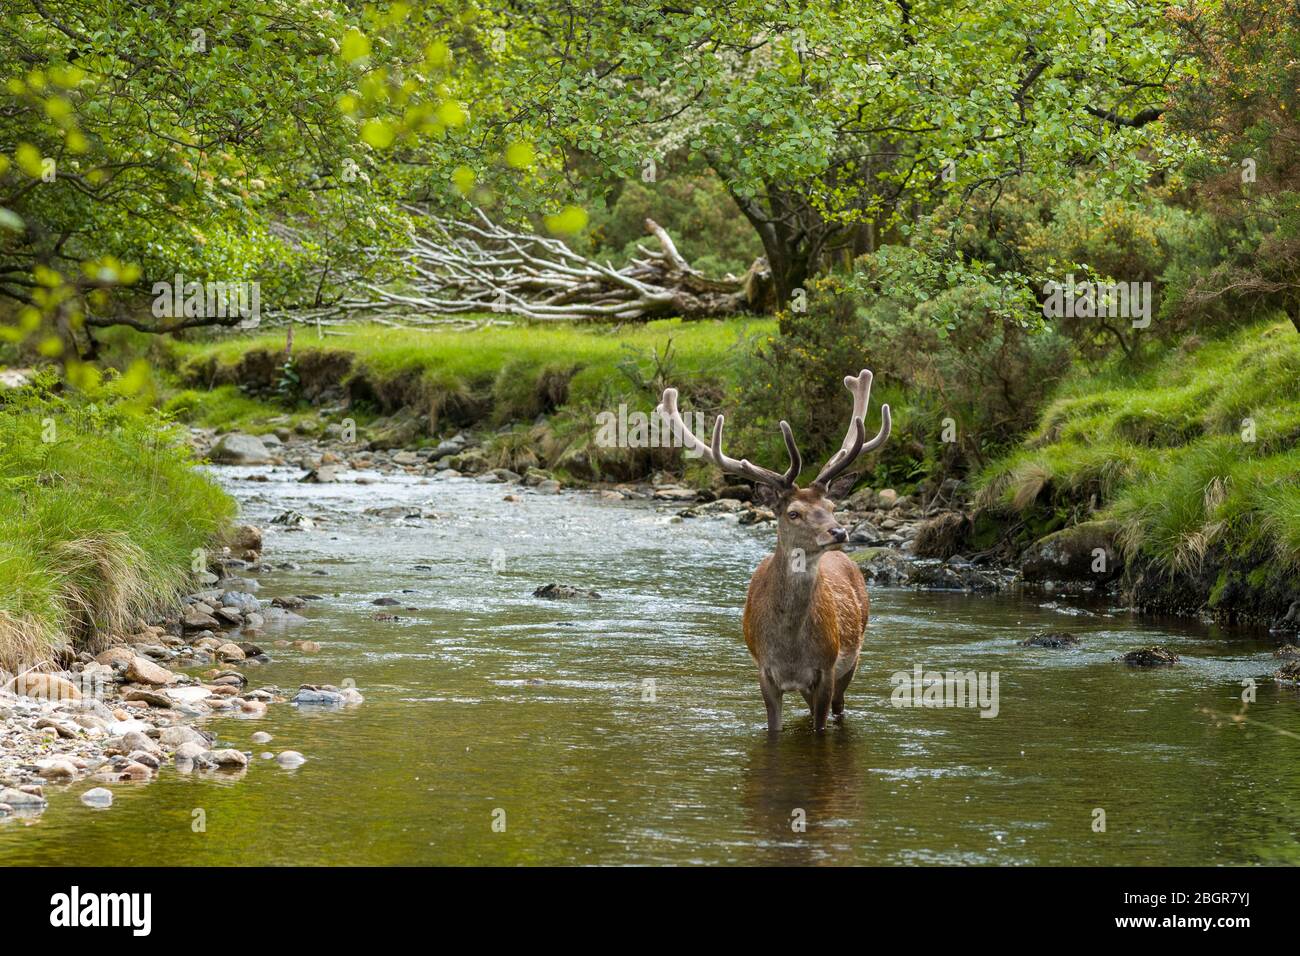 Red Deer stag, Cervus elaphus, adult mature male with large antlers in river scene at Lochranza, Isle of Arran, Scotland Stock Photo